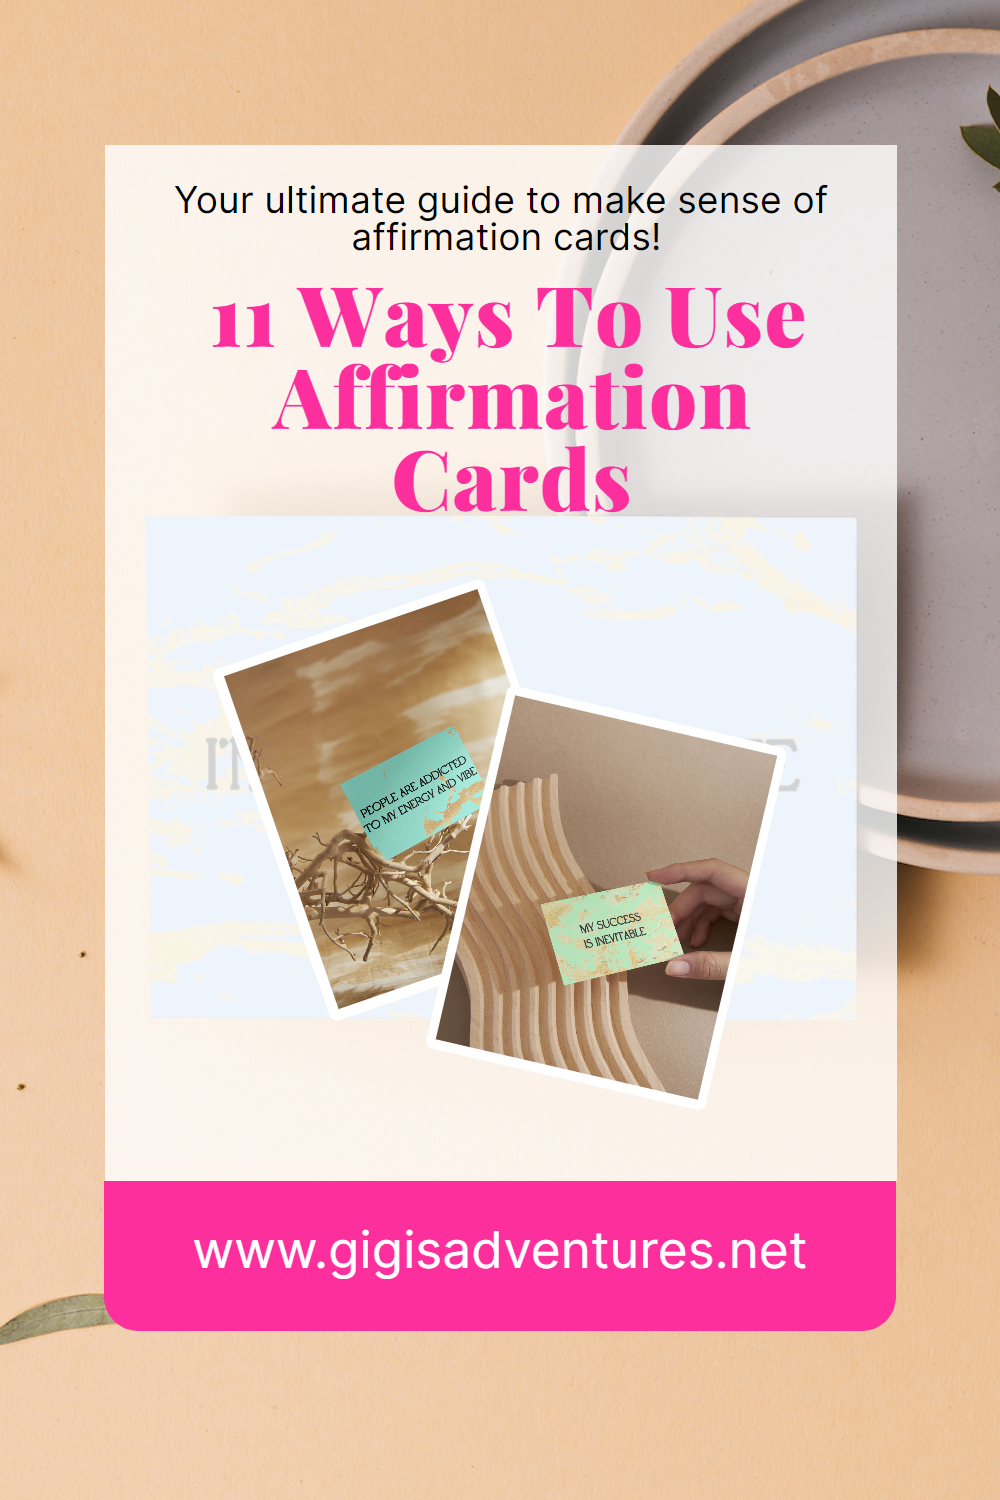 11 Ways To Use Affirmation Cards | Affirmation Cards Guide